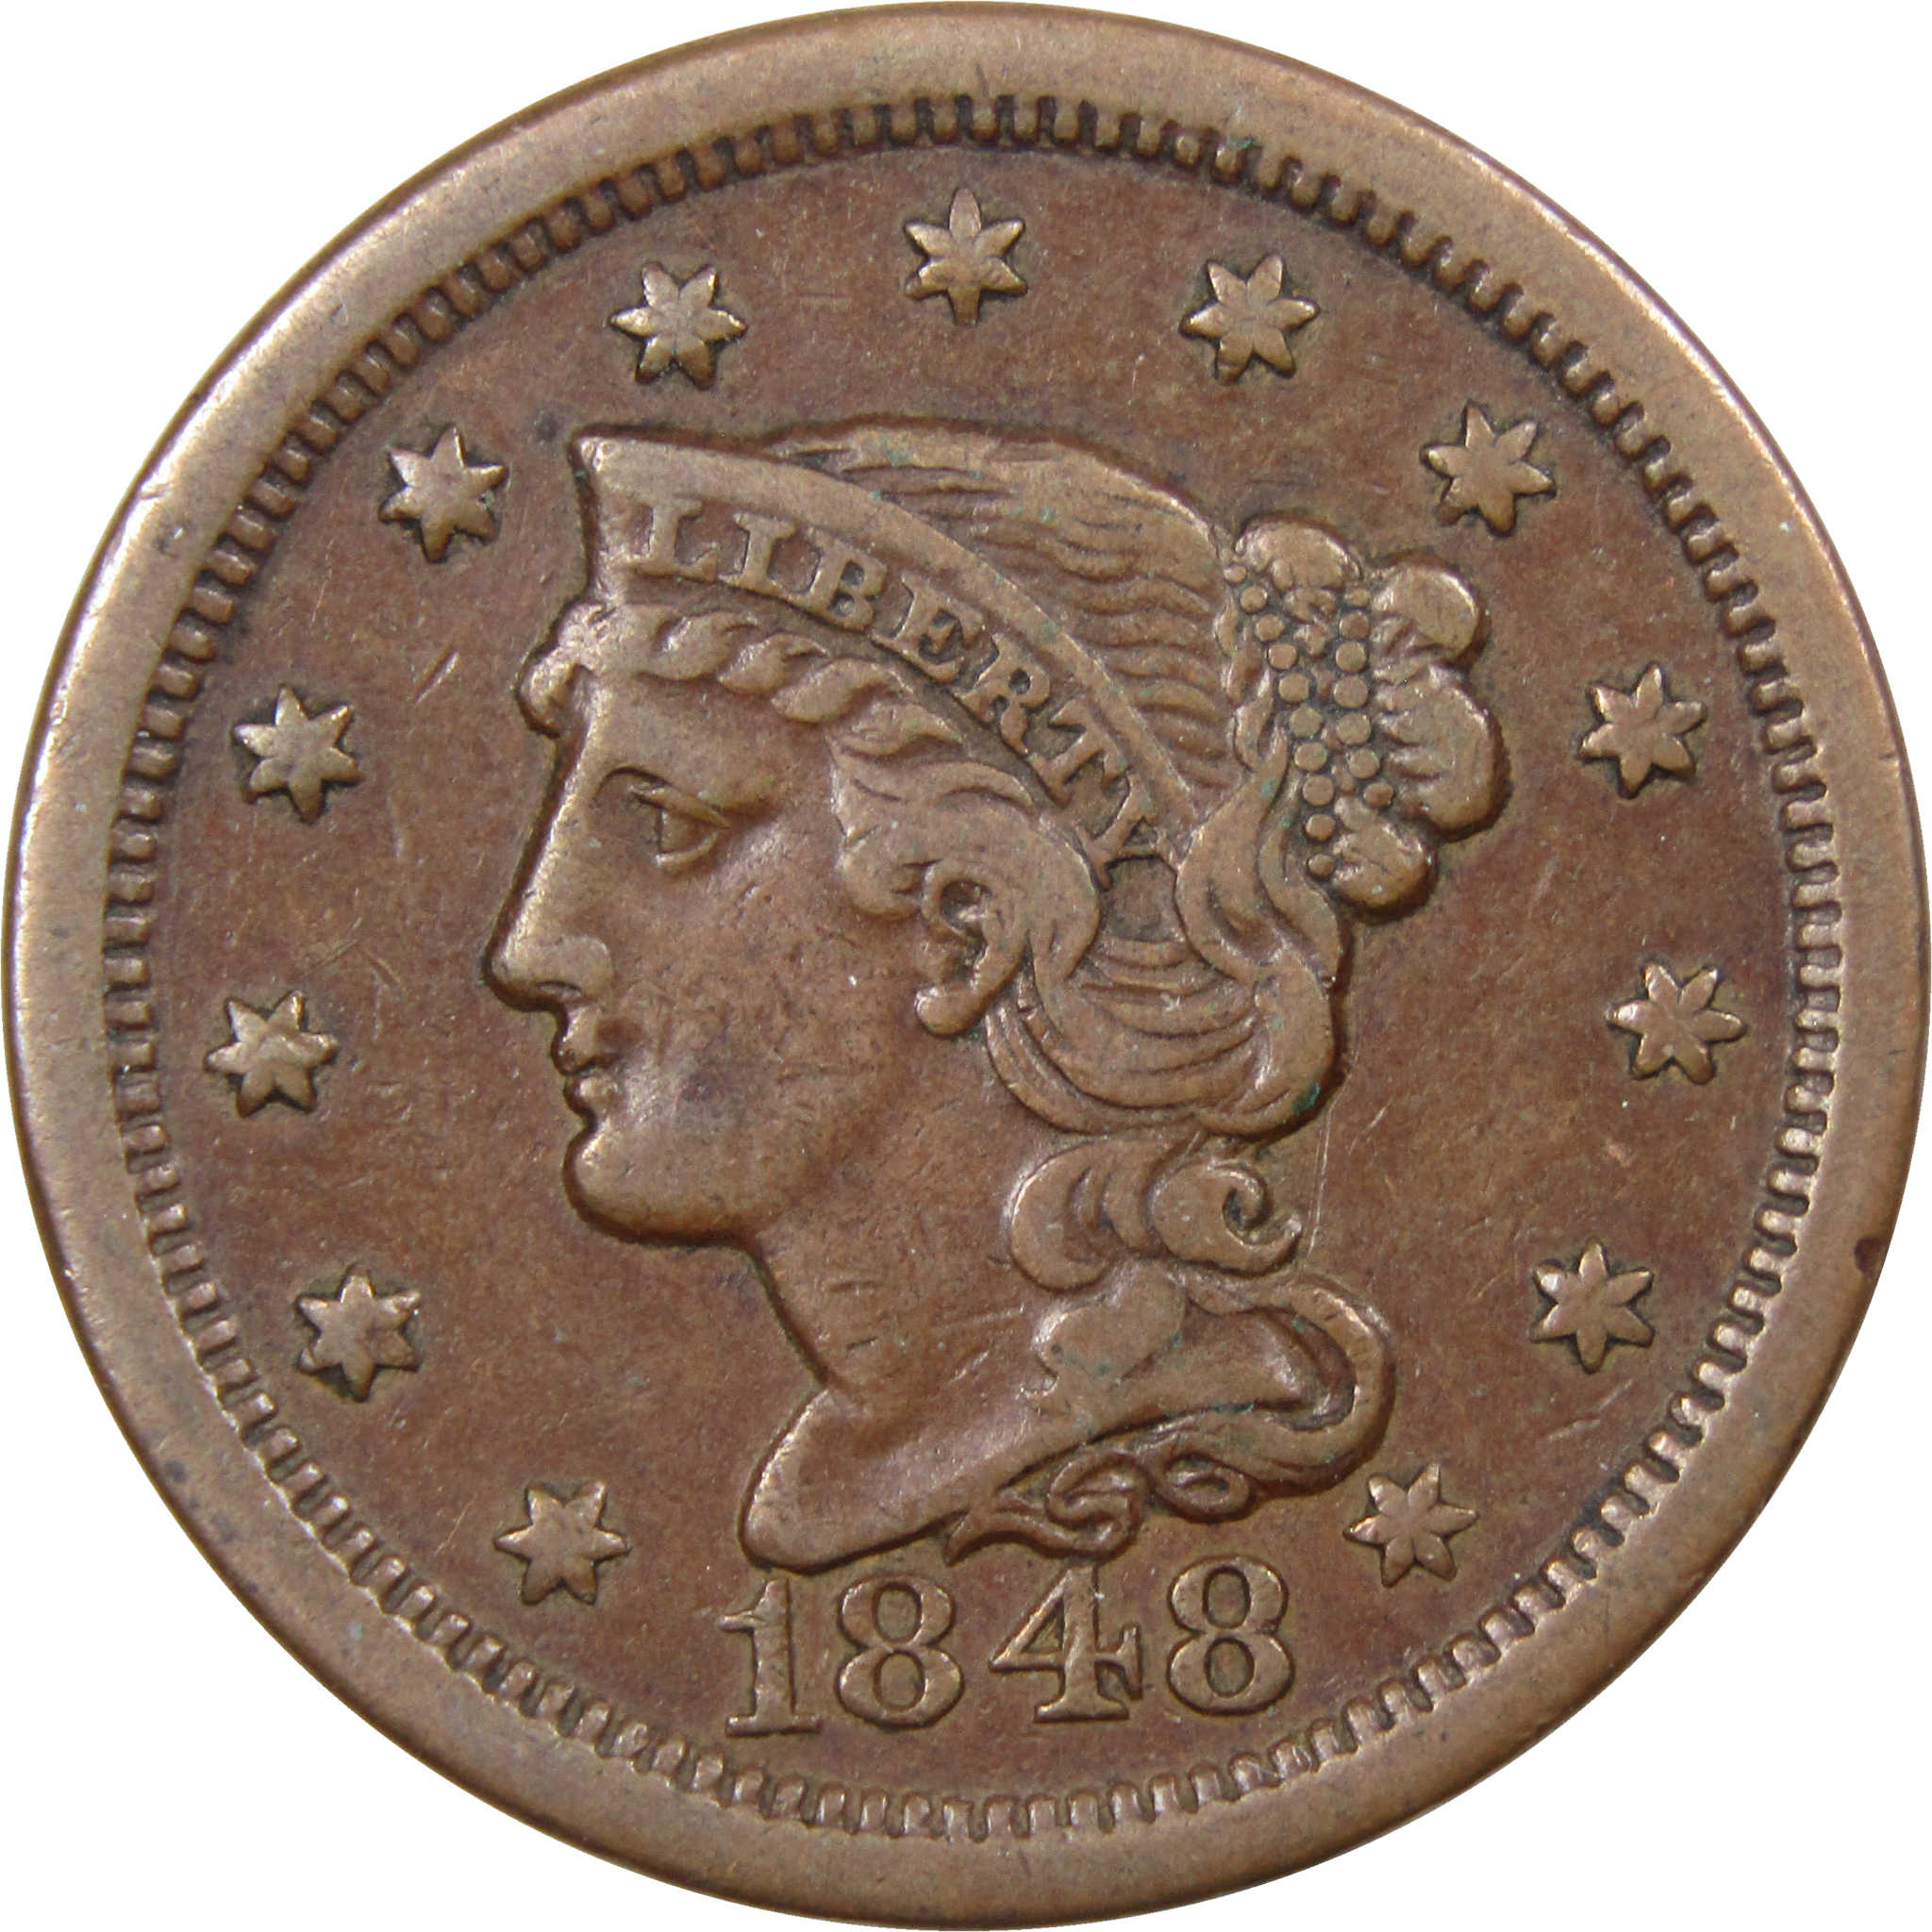 1851 Braided Hair Half Cent Copy - Non-currency Coins - AliExpress